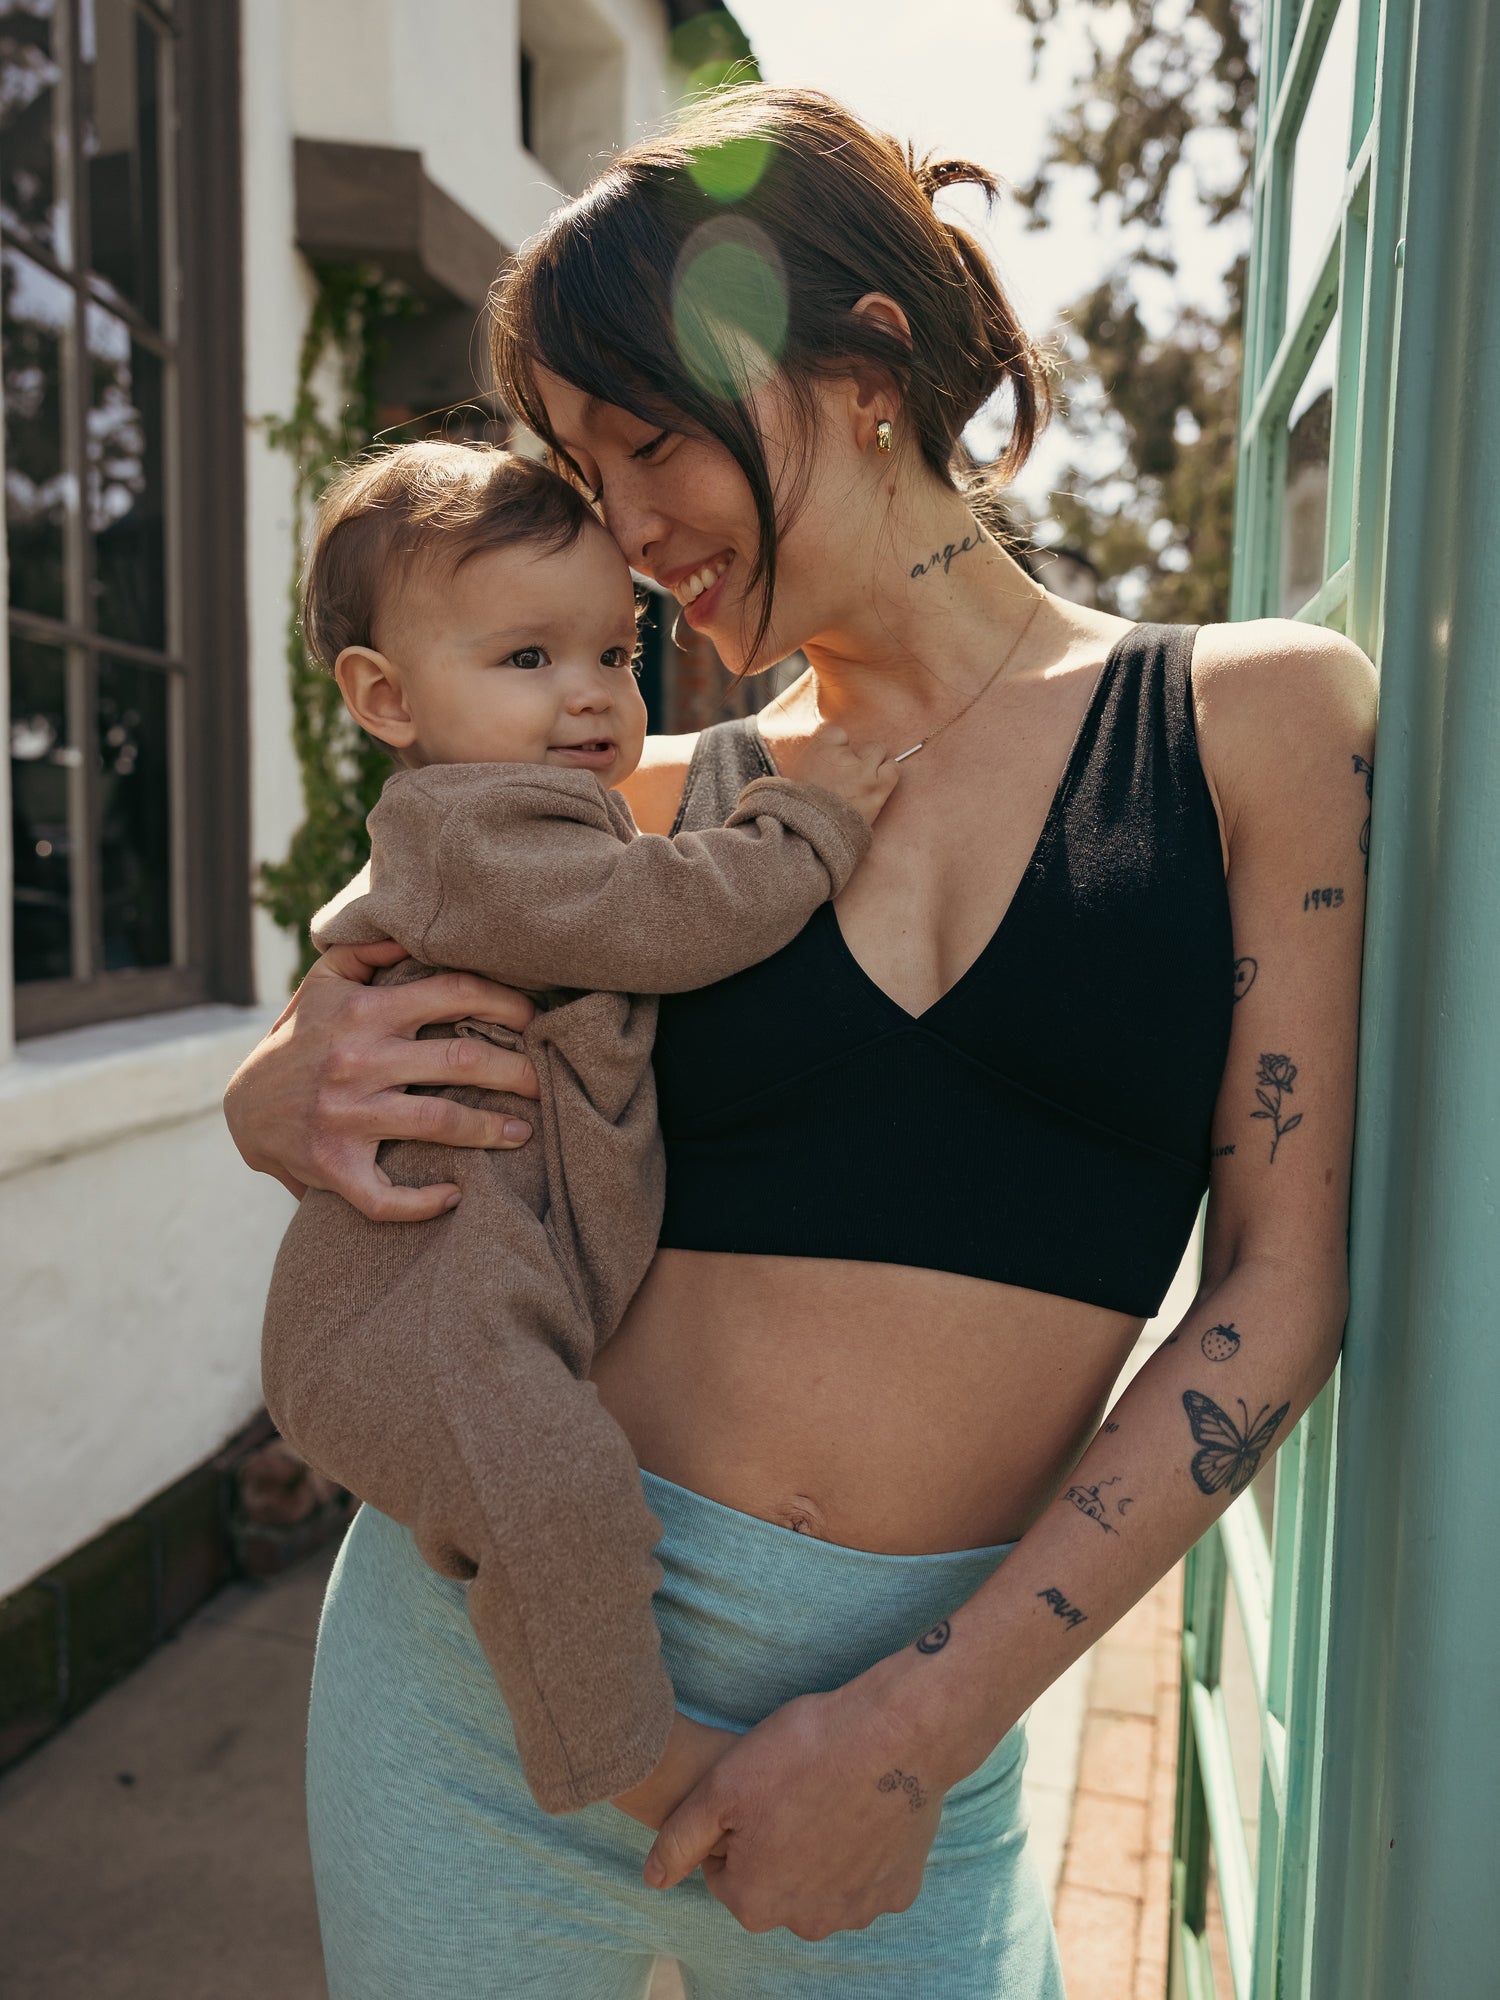 Model wearing the Sublime Maternity & Nursing Plunge Bra in Black paired with the Sublime Bamboo Bike Shorts in Dusty Blue Green. She is holding her baby. @model_info:Lyn is wearing a Small.